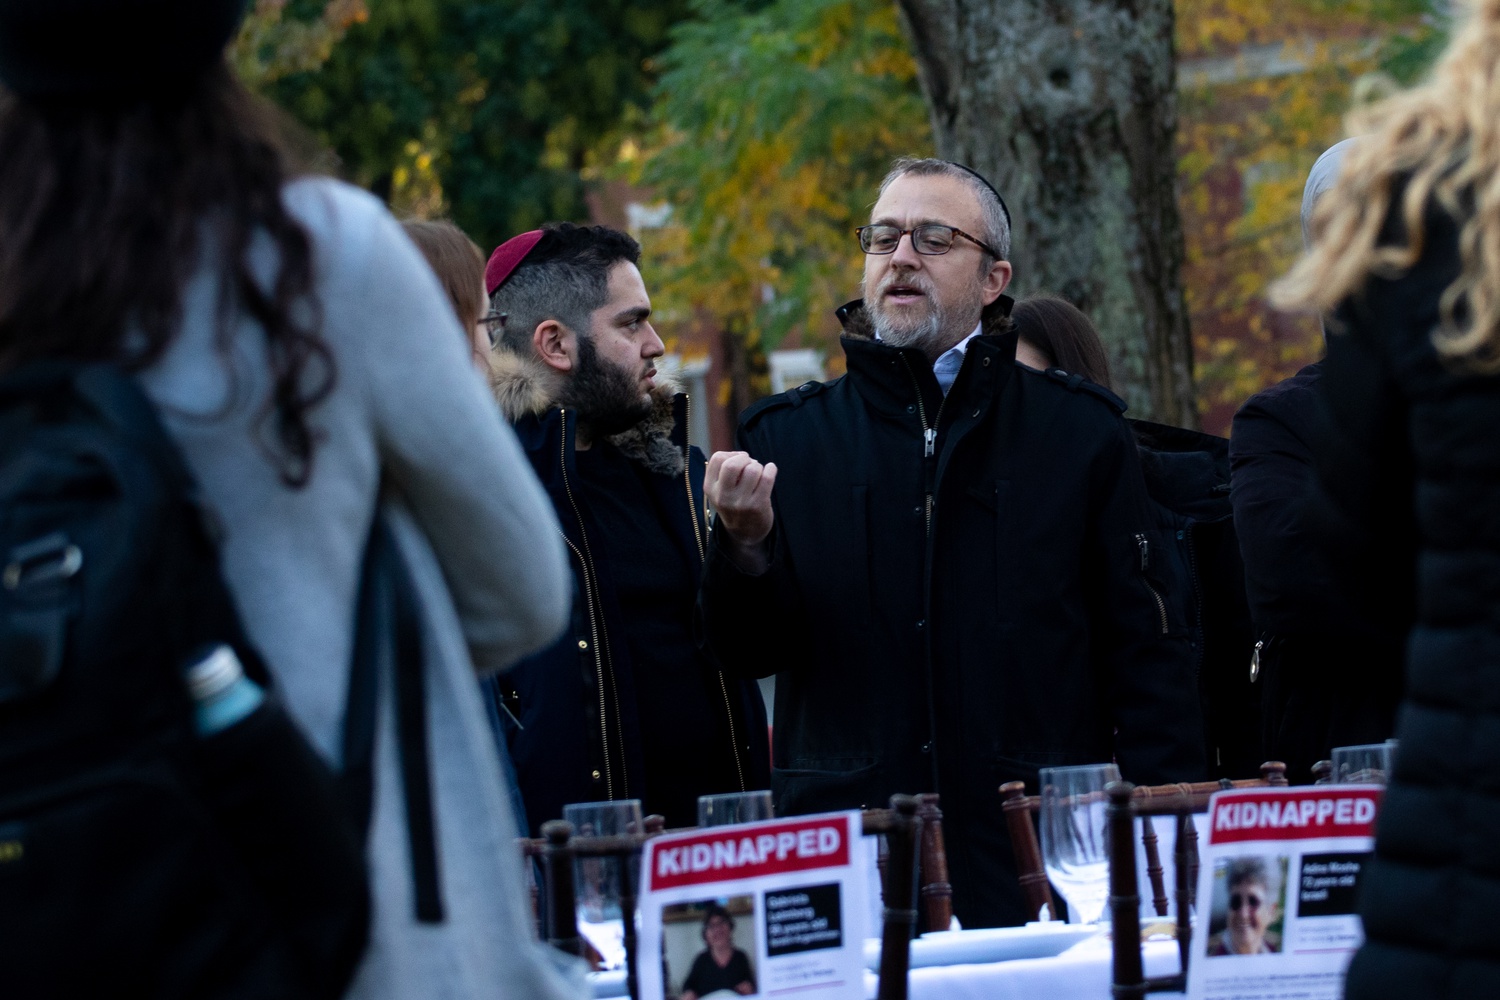 Rabbi Hirschy Zarchi, the president and founder of Harvard Chabad, called on administrators to revoke recognition of the Harvard Undergraduate Palestine Solidarity Committee.